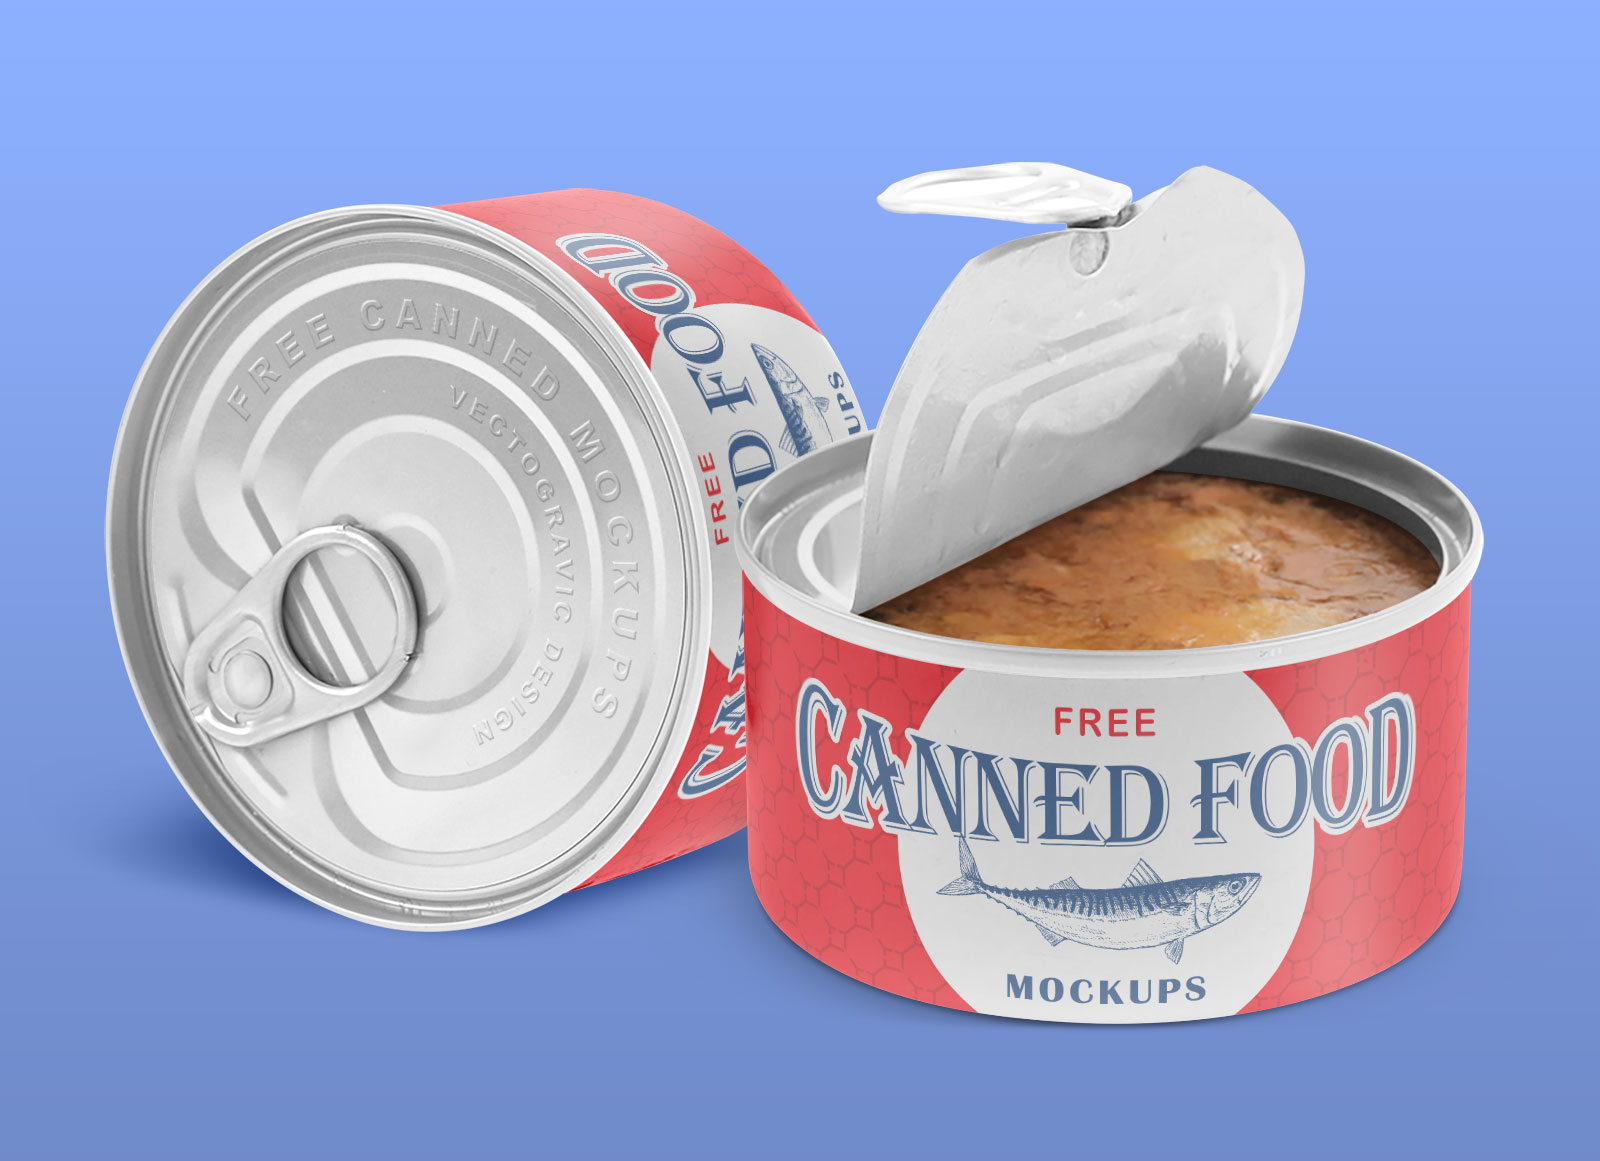 Download Free Canned Food Tin Container Packaging Mockup PSD - Good Mockups